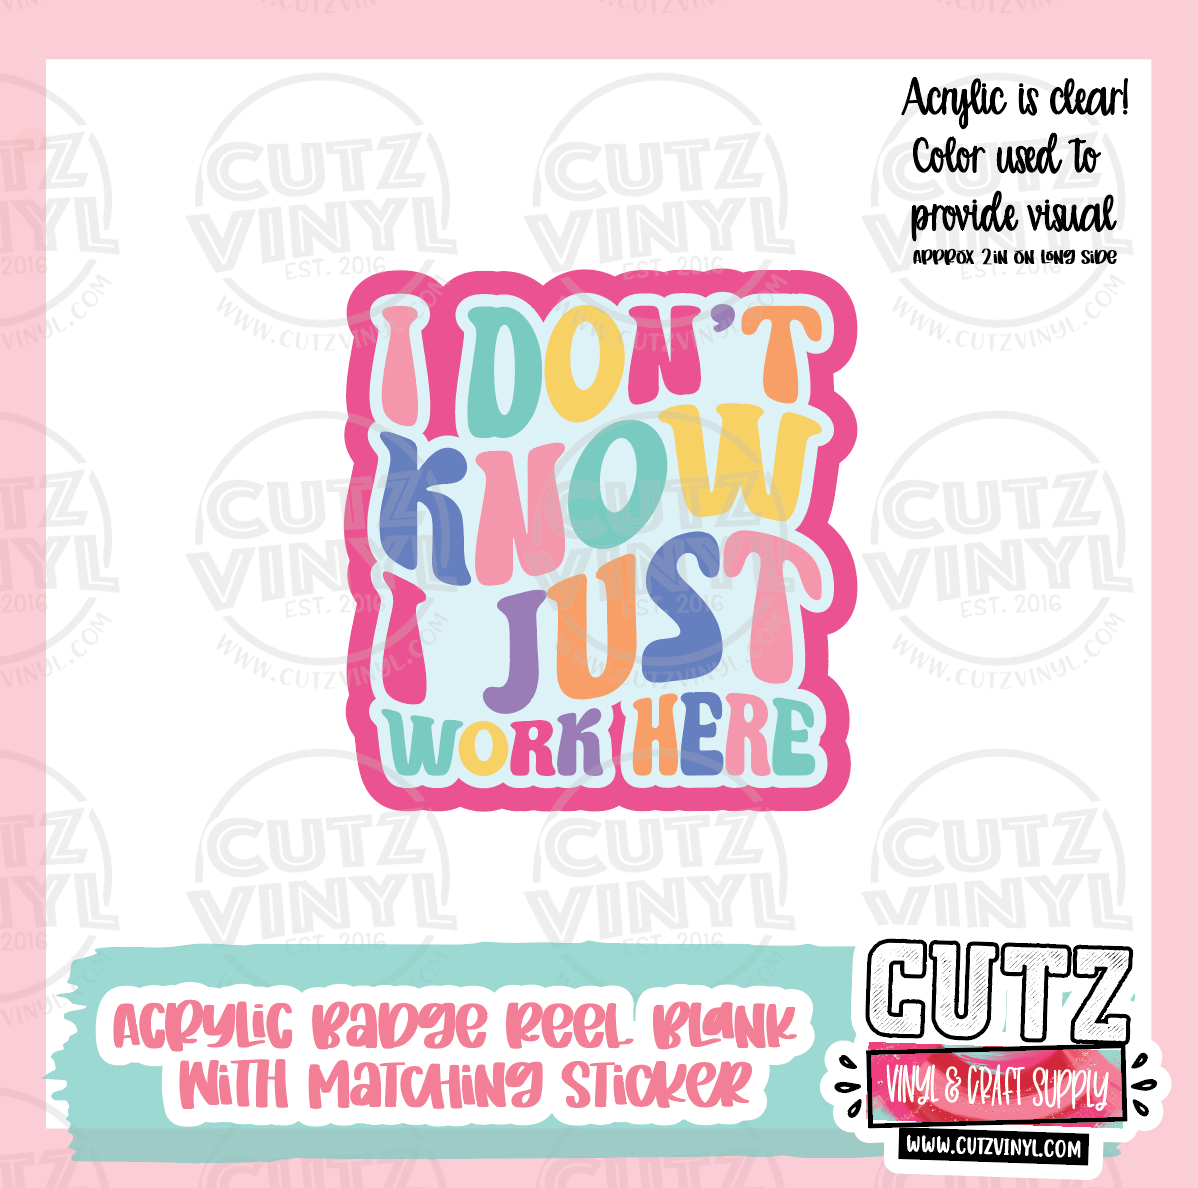 I Don't Know I Just Work - Acrylic Badge Reel Blank and Matching Sticker